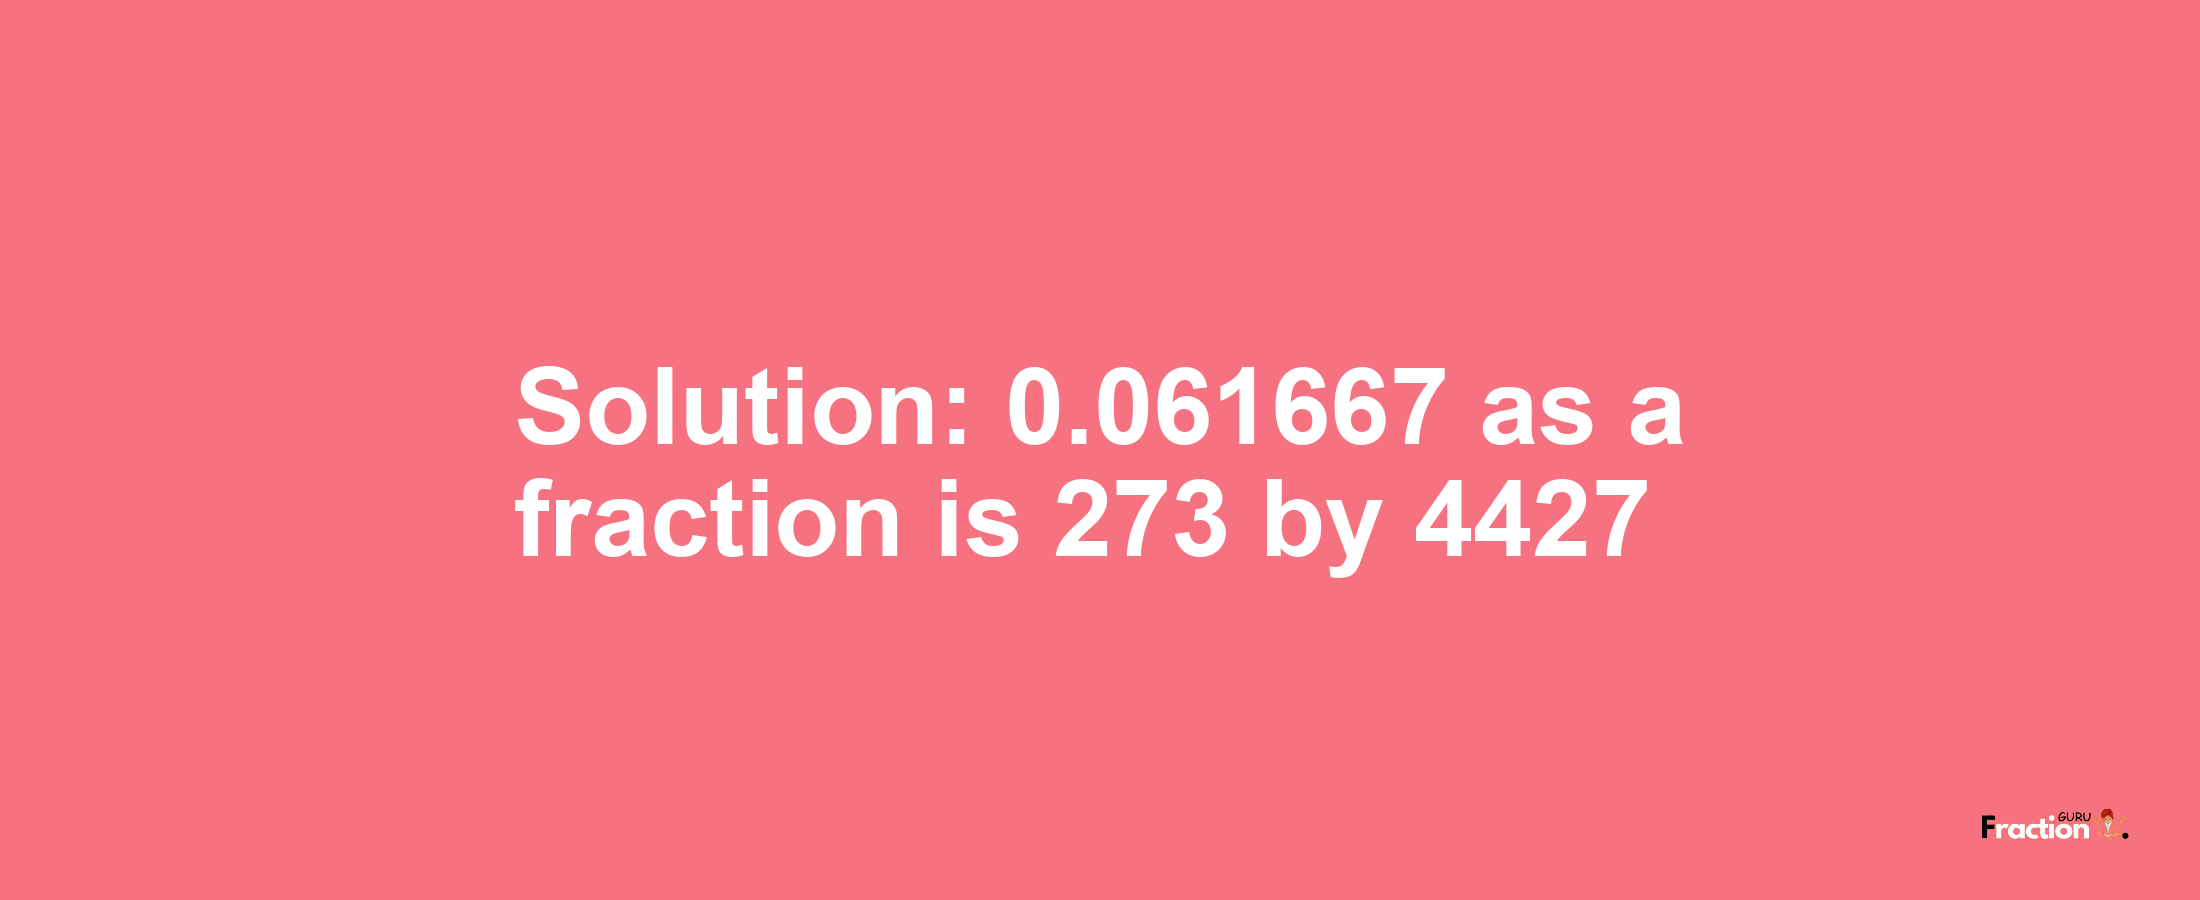 Solution:0.061667 as a fraction is 273/4427